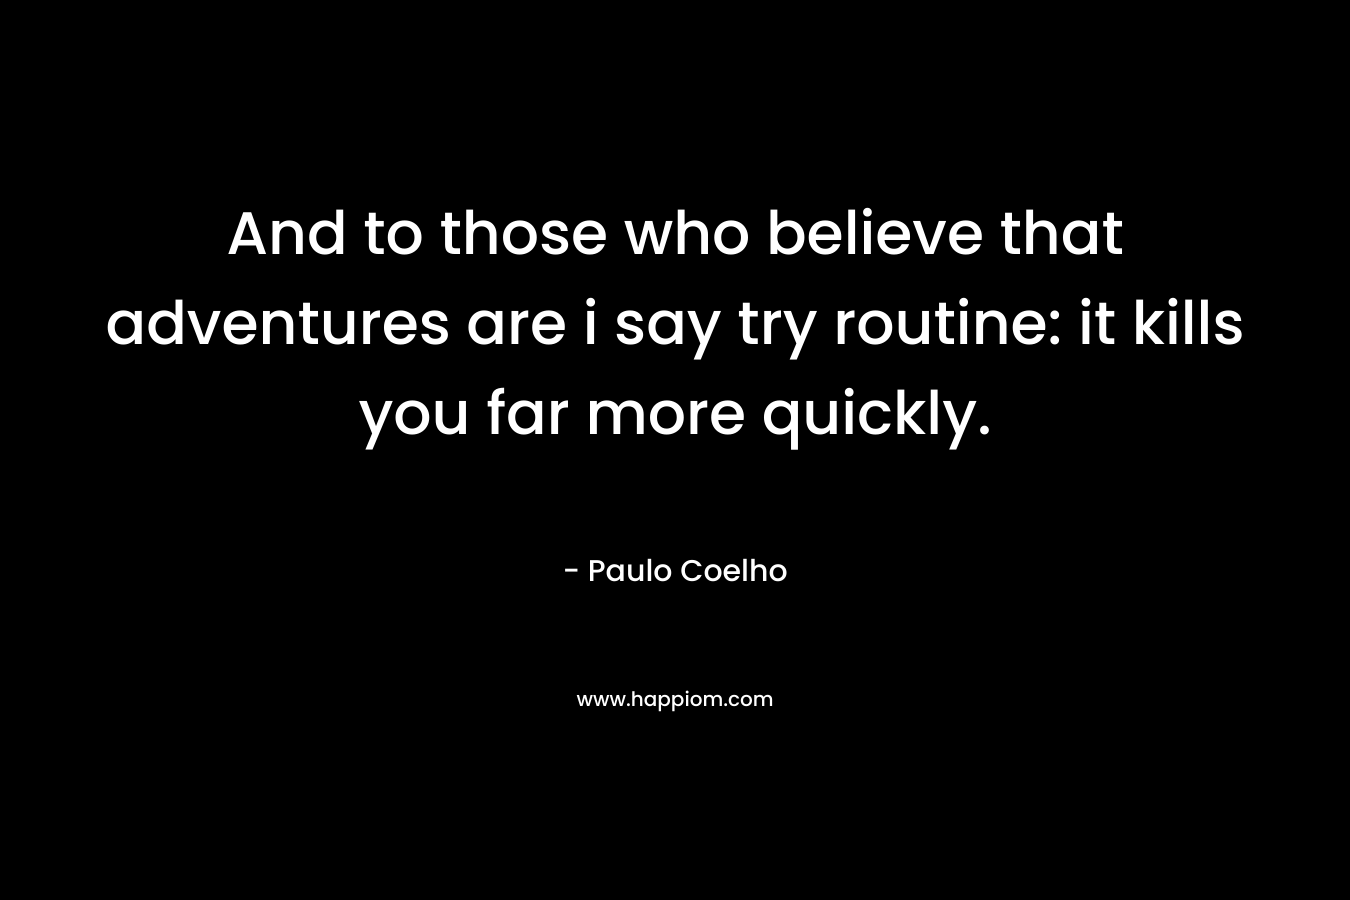 And to those who believe that adventures are i say try routine: it kills you far more quickly. – Paulo Coelho